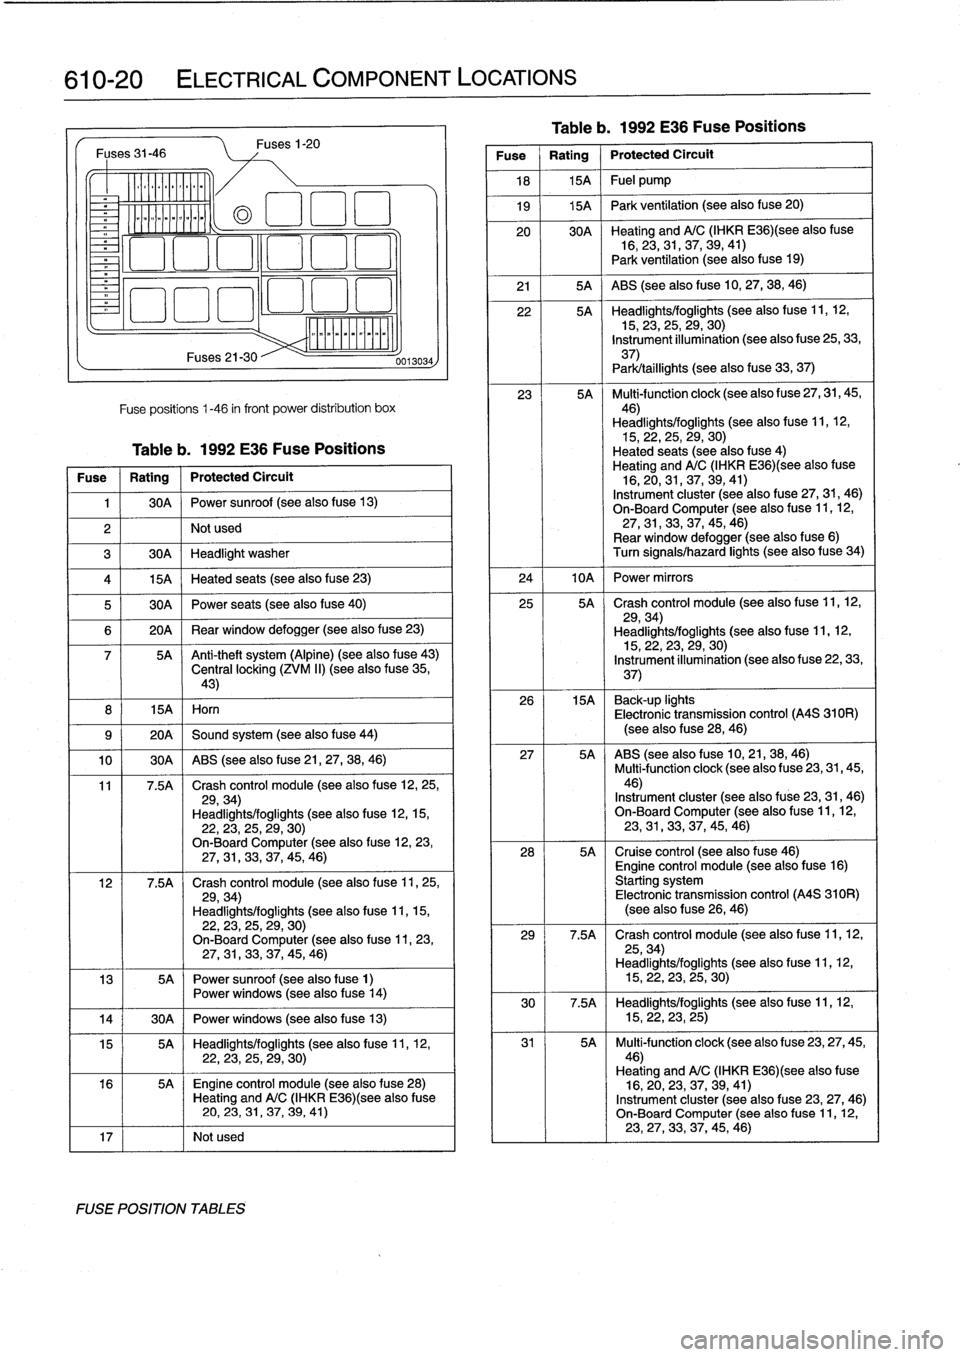 BMW 323i 1997 E36 Workshop Manual 
610-20

	

ELECTRICAL
COMPONENT
LOCATIONS

Fuses
31-46

o_

~oomoo
ommmo~

8
I

	

15A
I
Horn
Fuses21-30

Fuses
1-20

Fuse
positions
1-46
in
front
power
distribution
box

Table
b
.
1992
E36
Fuse
Posi